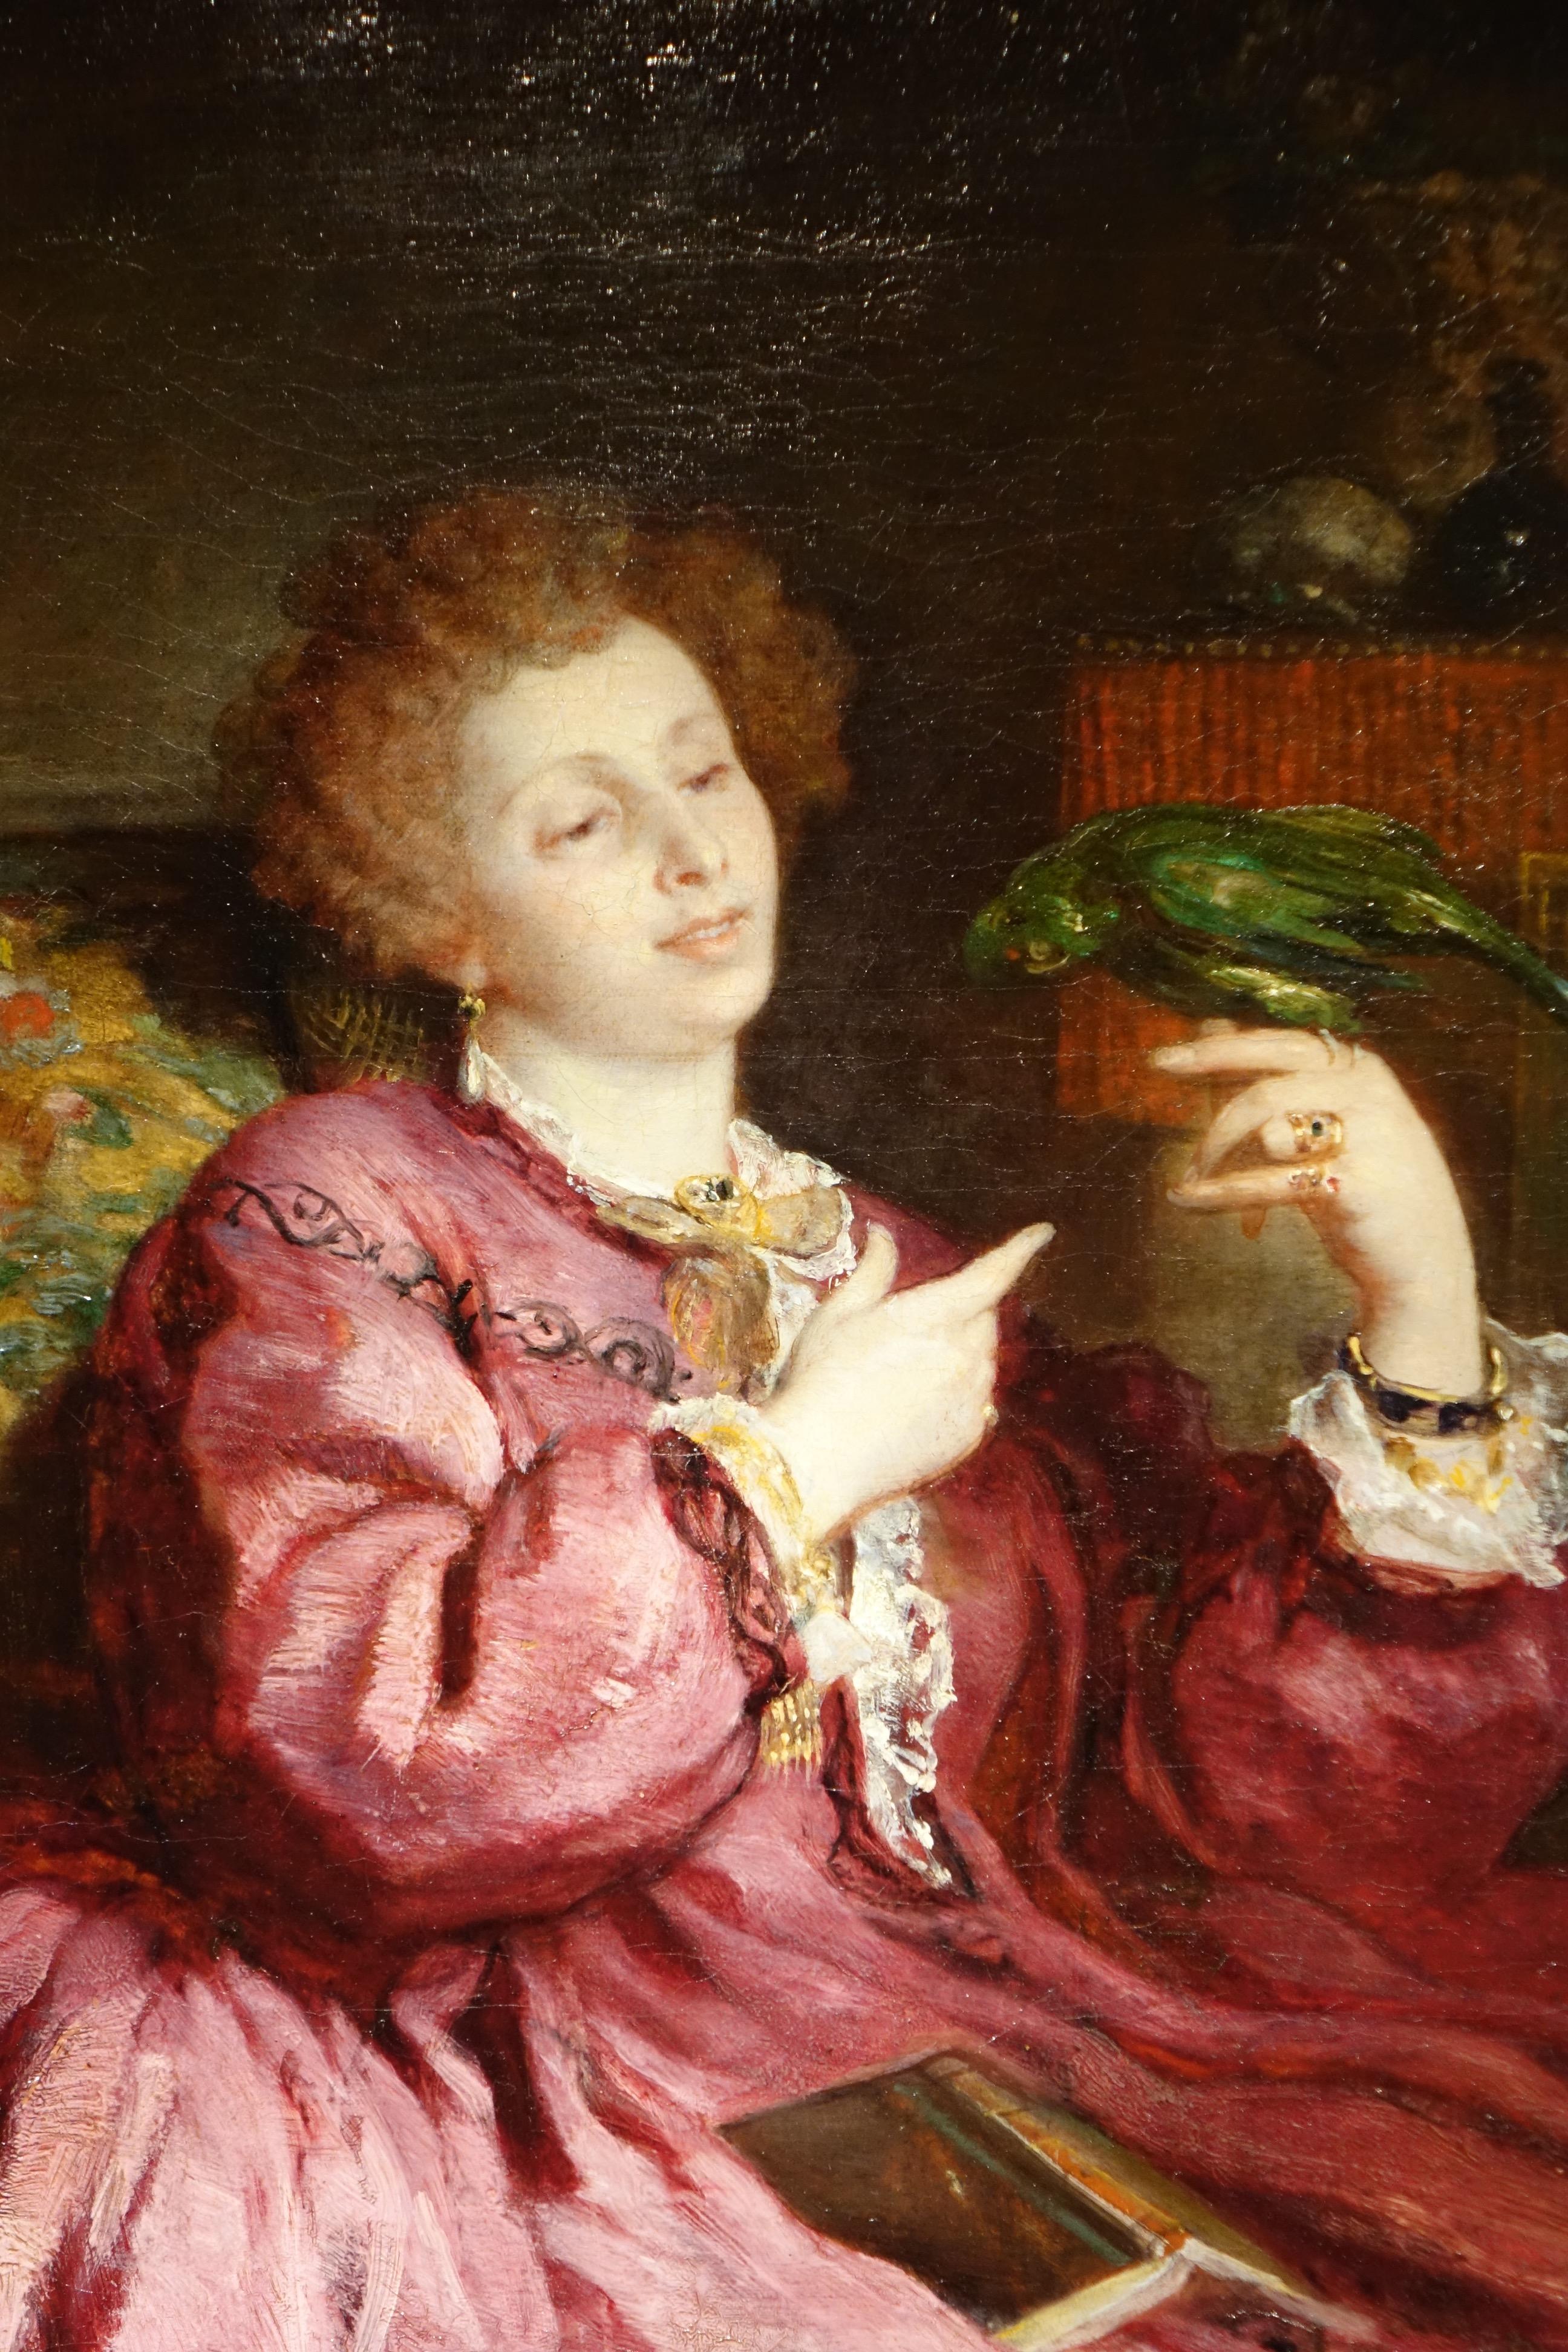 Oil on canvas representing a young woman interrupting her reading to play with her parrot, signed in left as V.de Bornschlegel.
Victor de Bornschlegel was a French painter, born in Sierck, Moselle (eastern departement) in 1820.
He was specialized